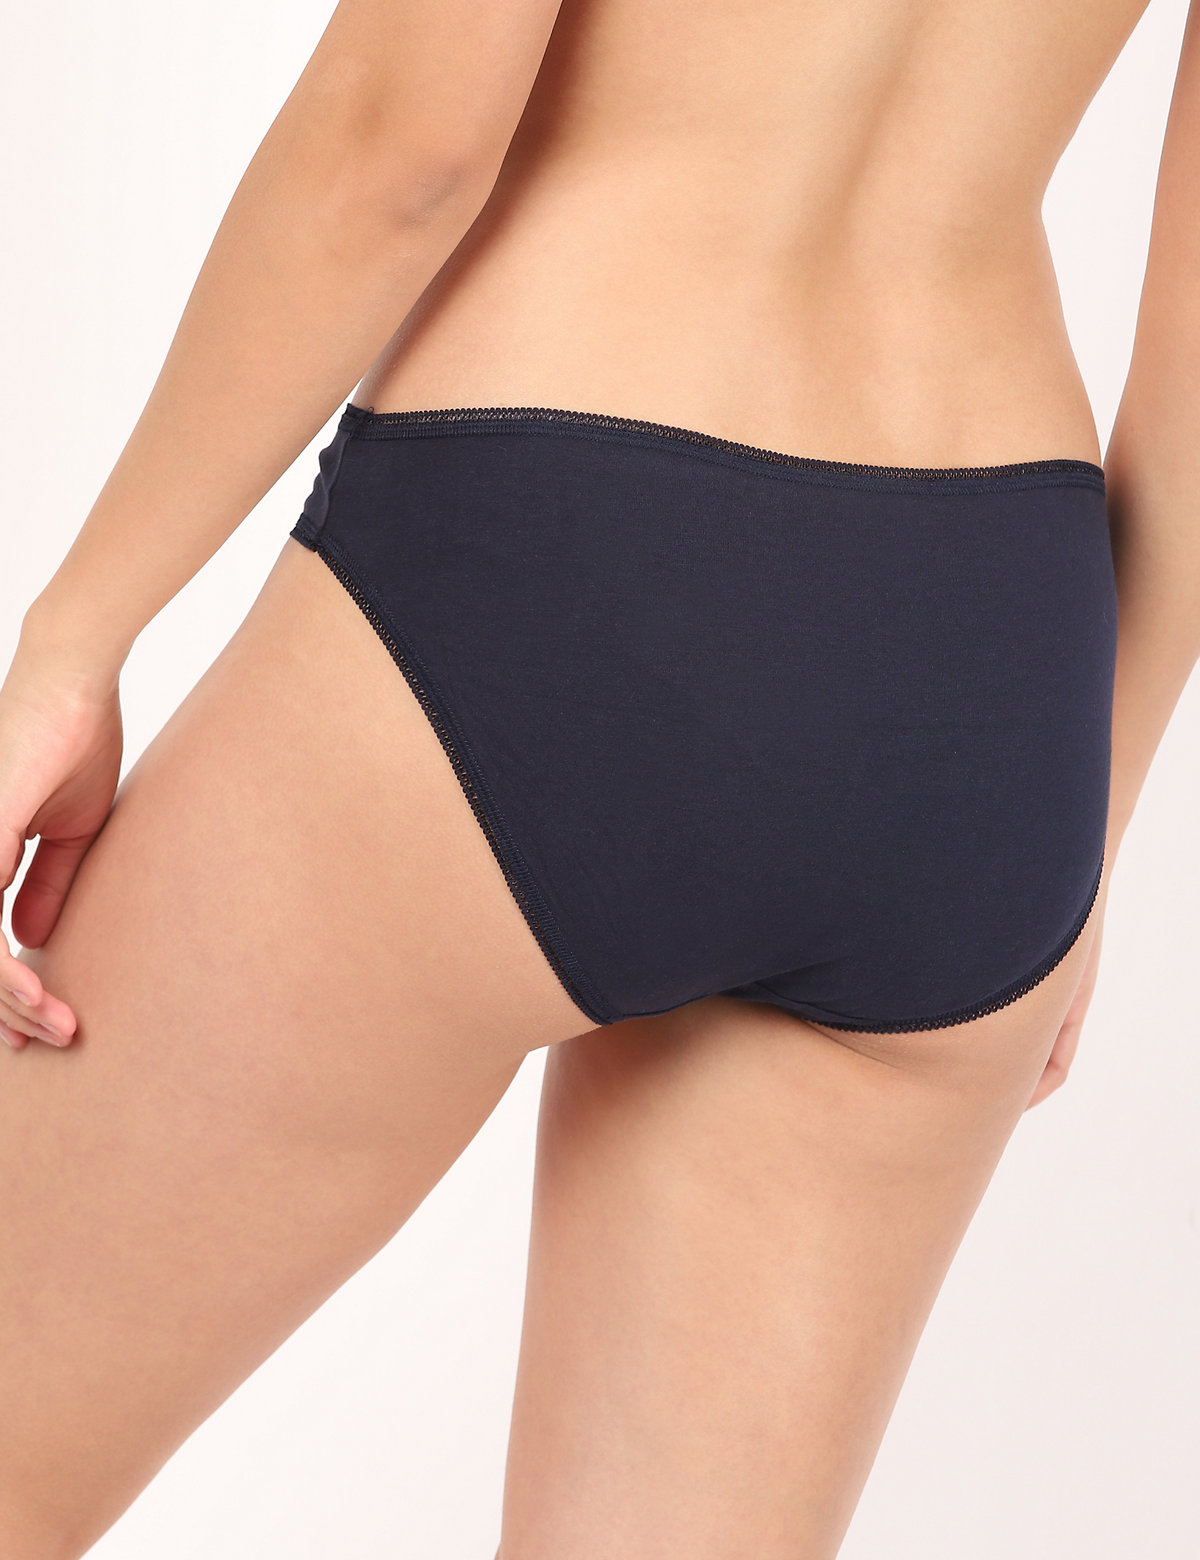 5 Pack Cotton Mix Skinny Fit Knickers